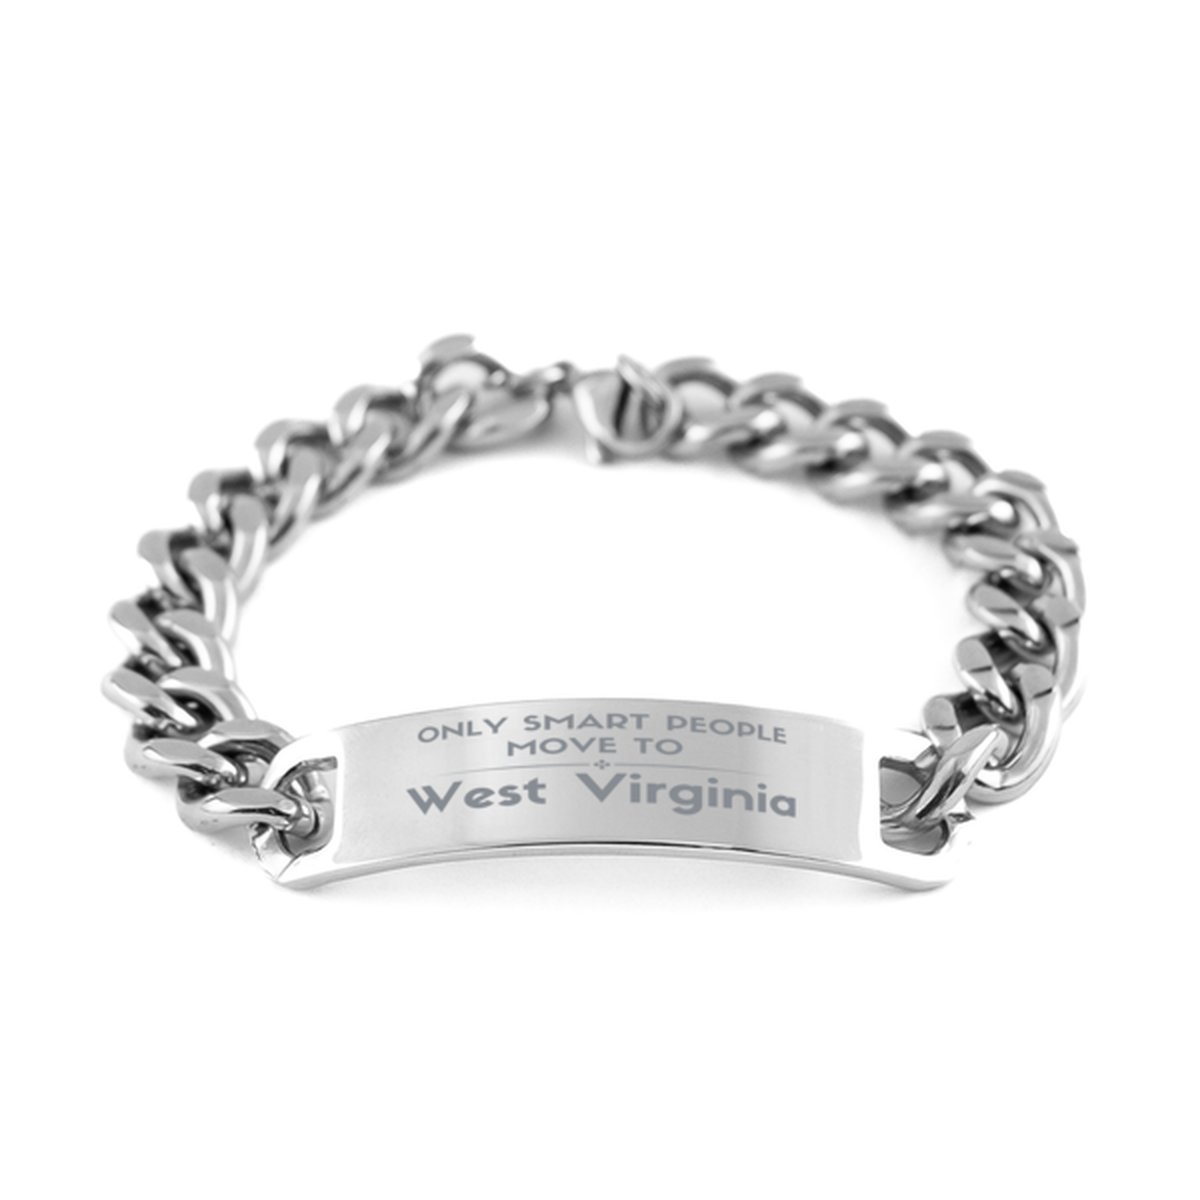 Only smart people move to West Virginia Cuban Chain Stainless Steel Bracelet, Gag Gifts For West Virginia, Move to West Virginia Gifts for Friends Coworker Funny Saying Quote